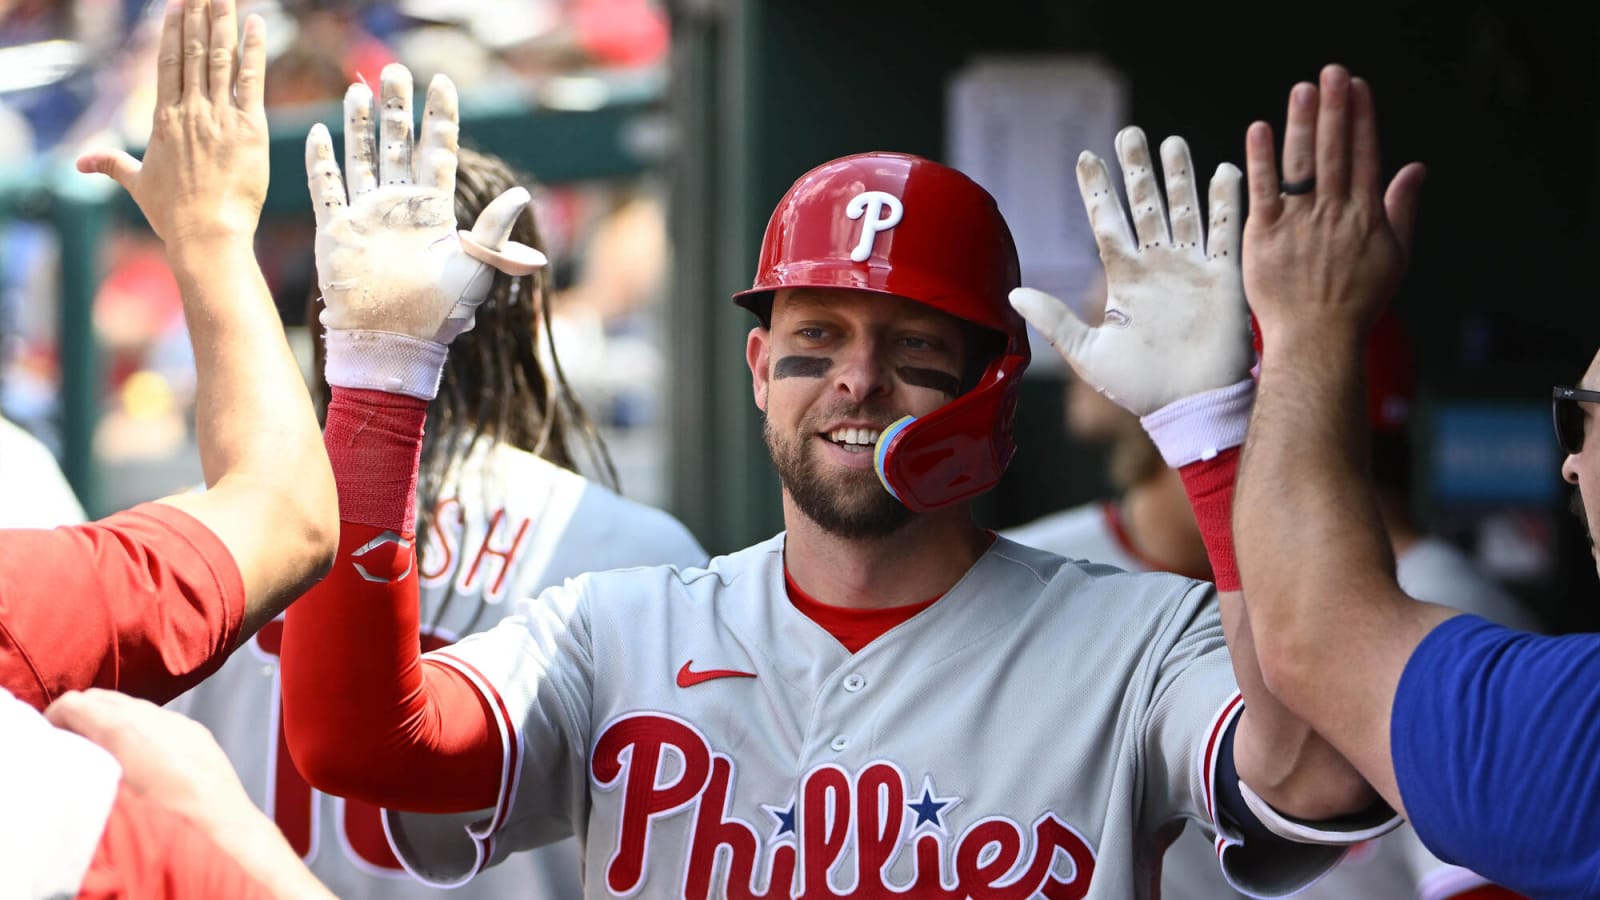 Phillies' call-up has career day after believing career was over